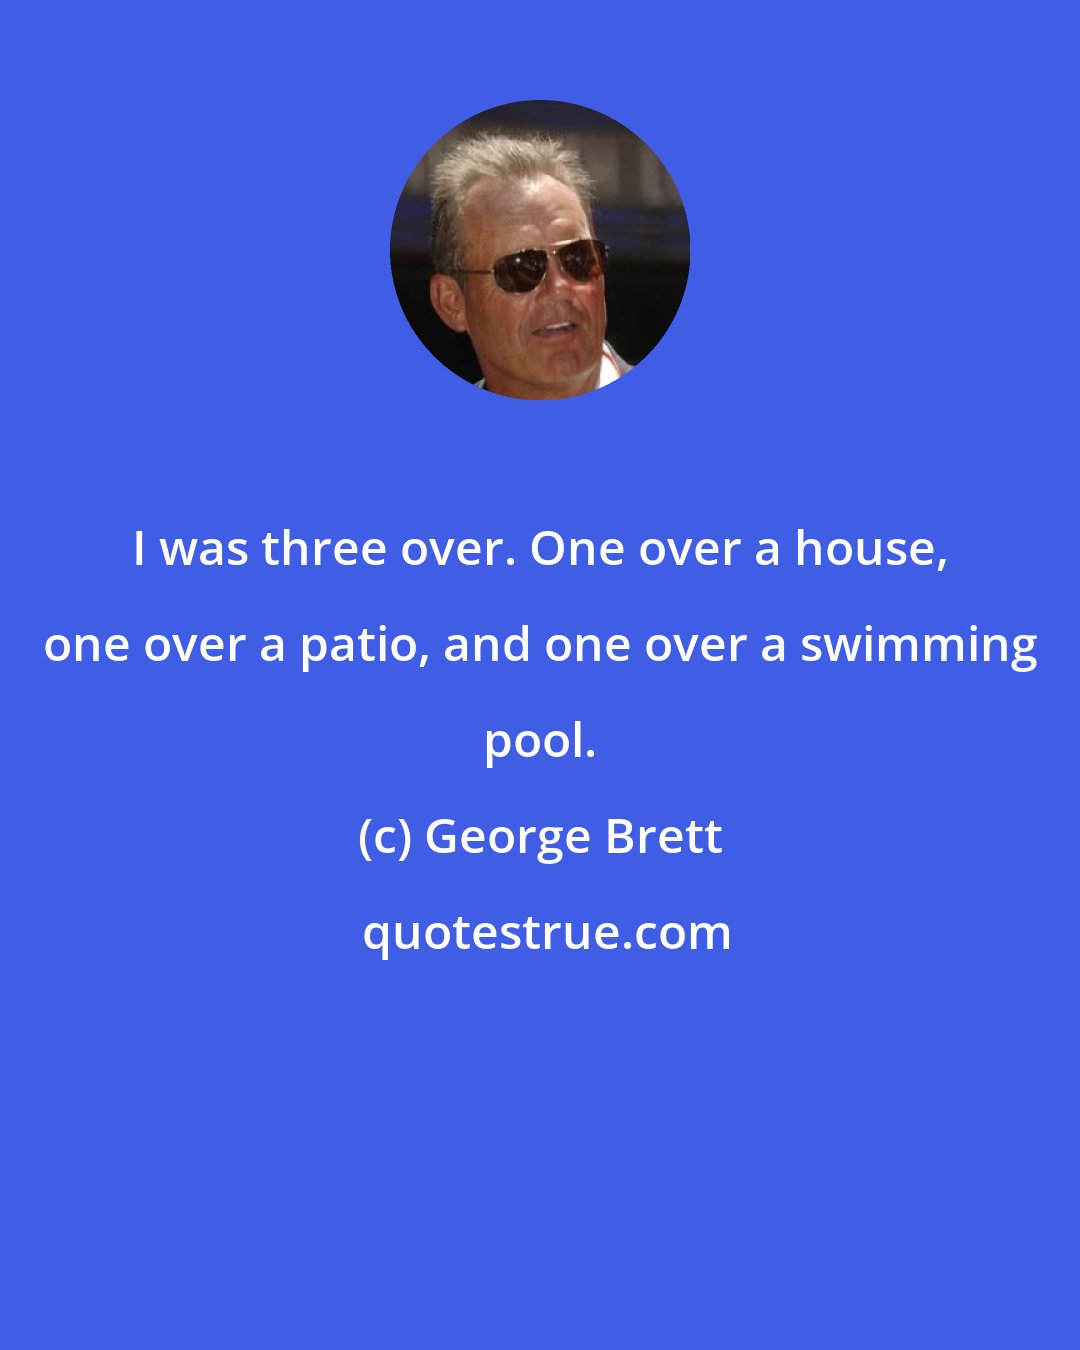 George Brett: I was three over. One over a house, one over a patio, and one over a swimming pool.